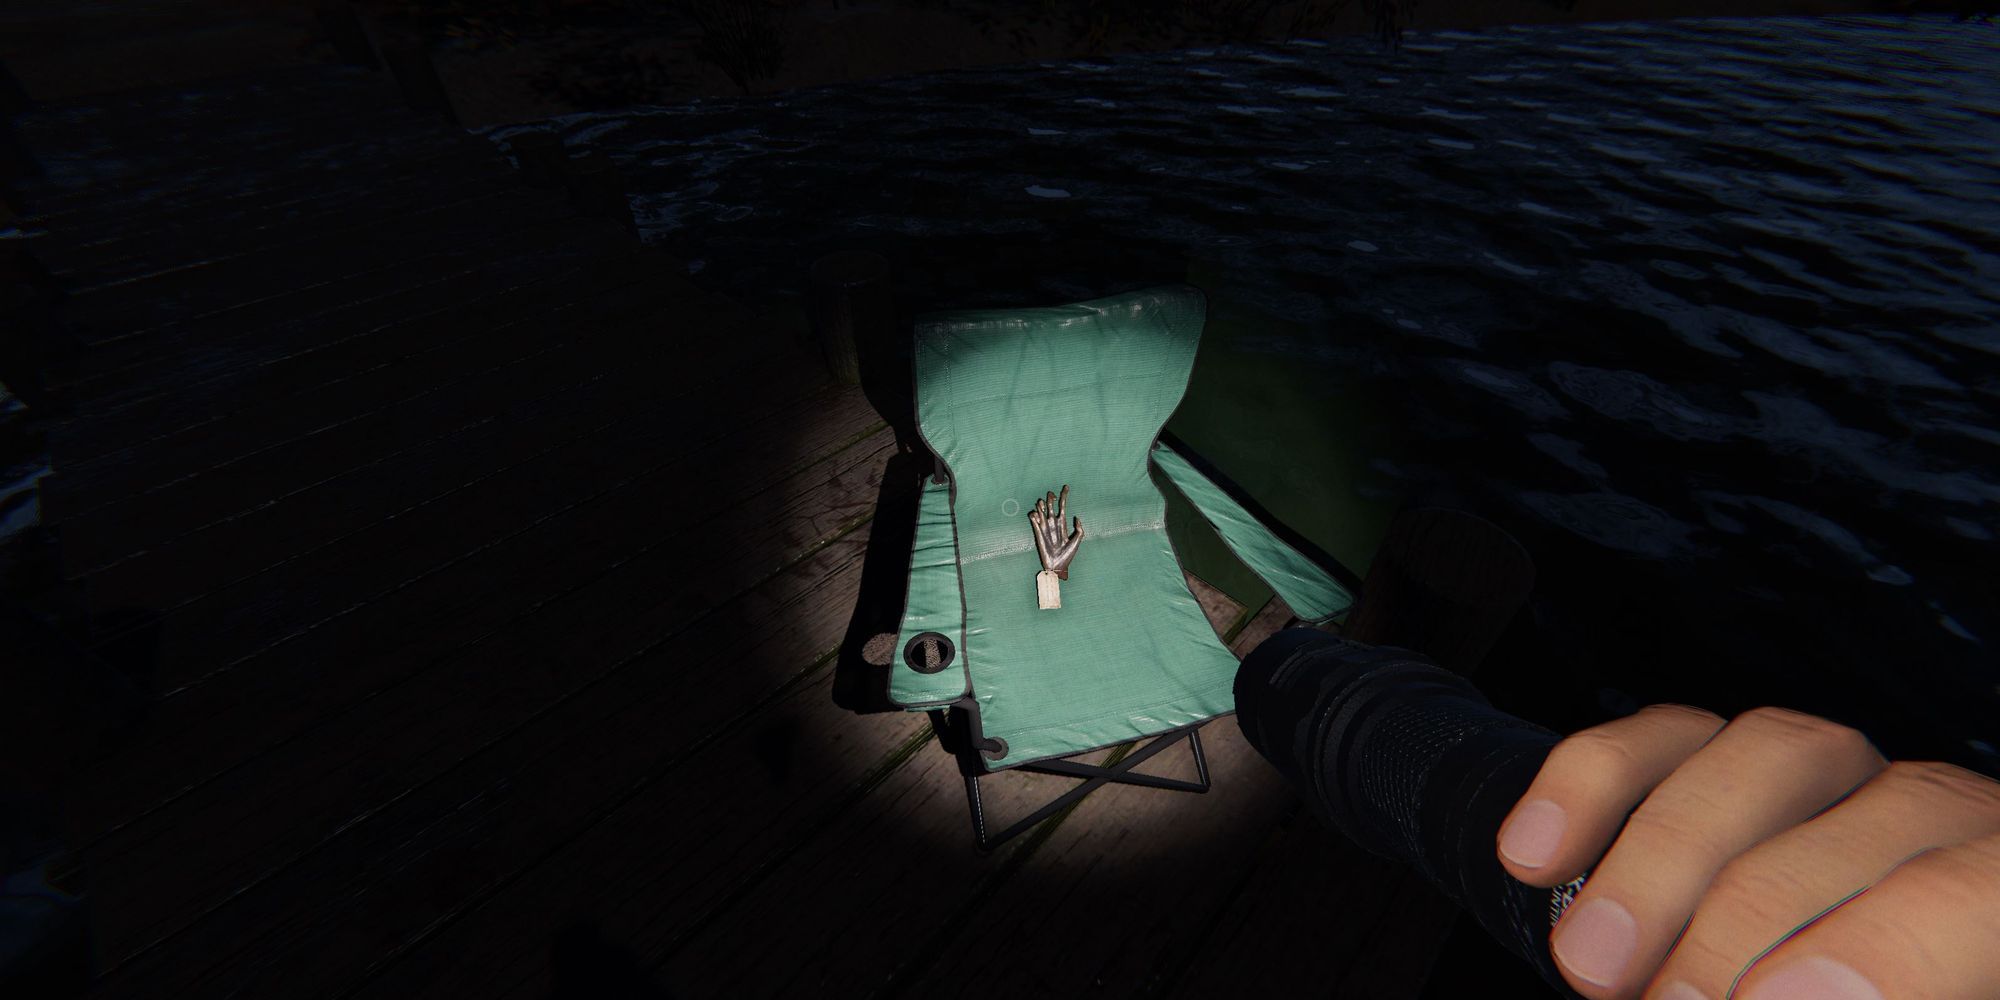 Image depicts a monkey paw on a blue camping chair on a pier in Maple Lodge Campsite in Phasmophobia.